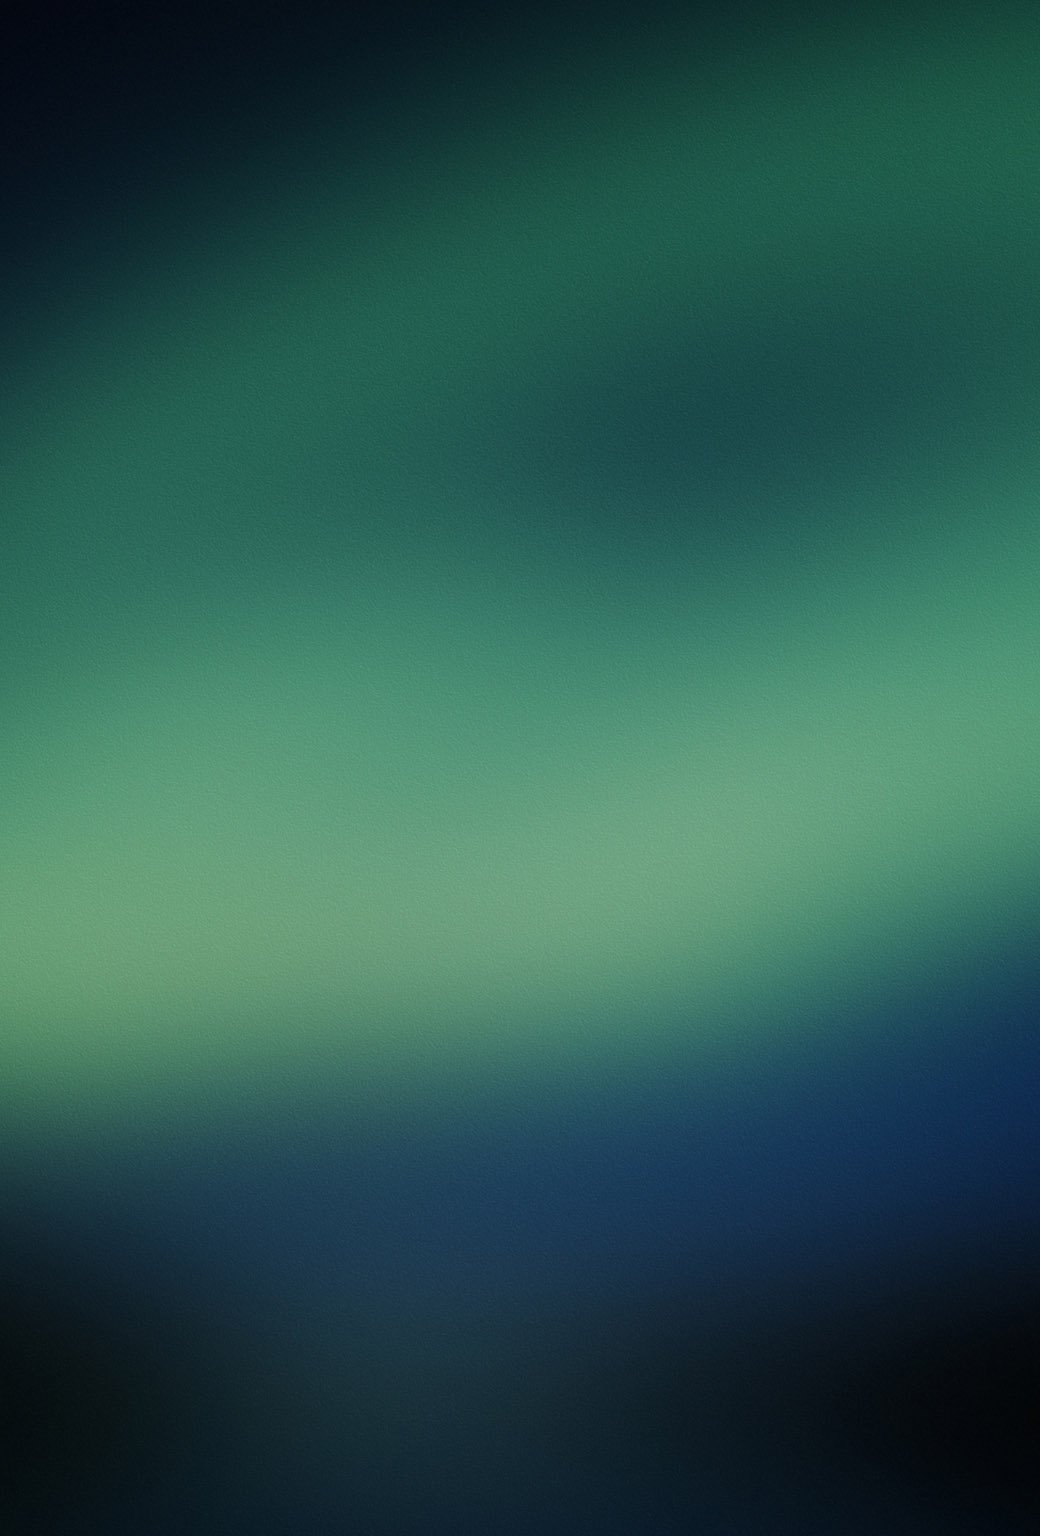  parallax ios 7 space backgrounds downhoard link parallax wallpapers